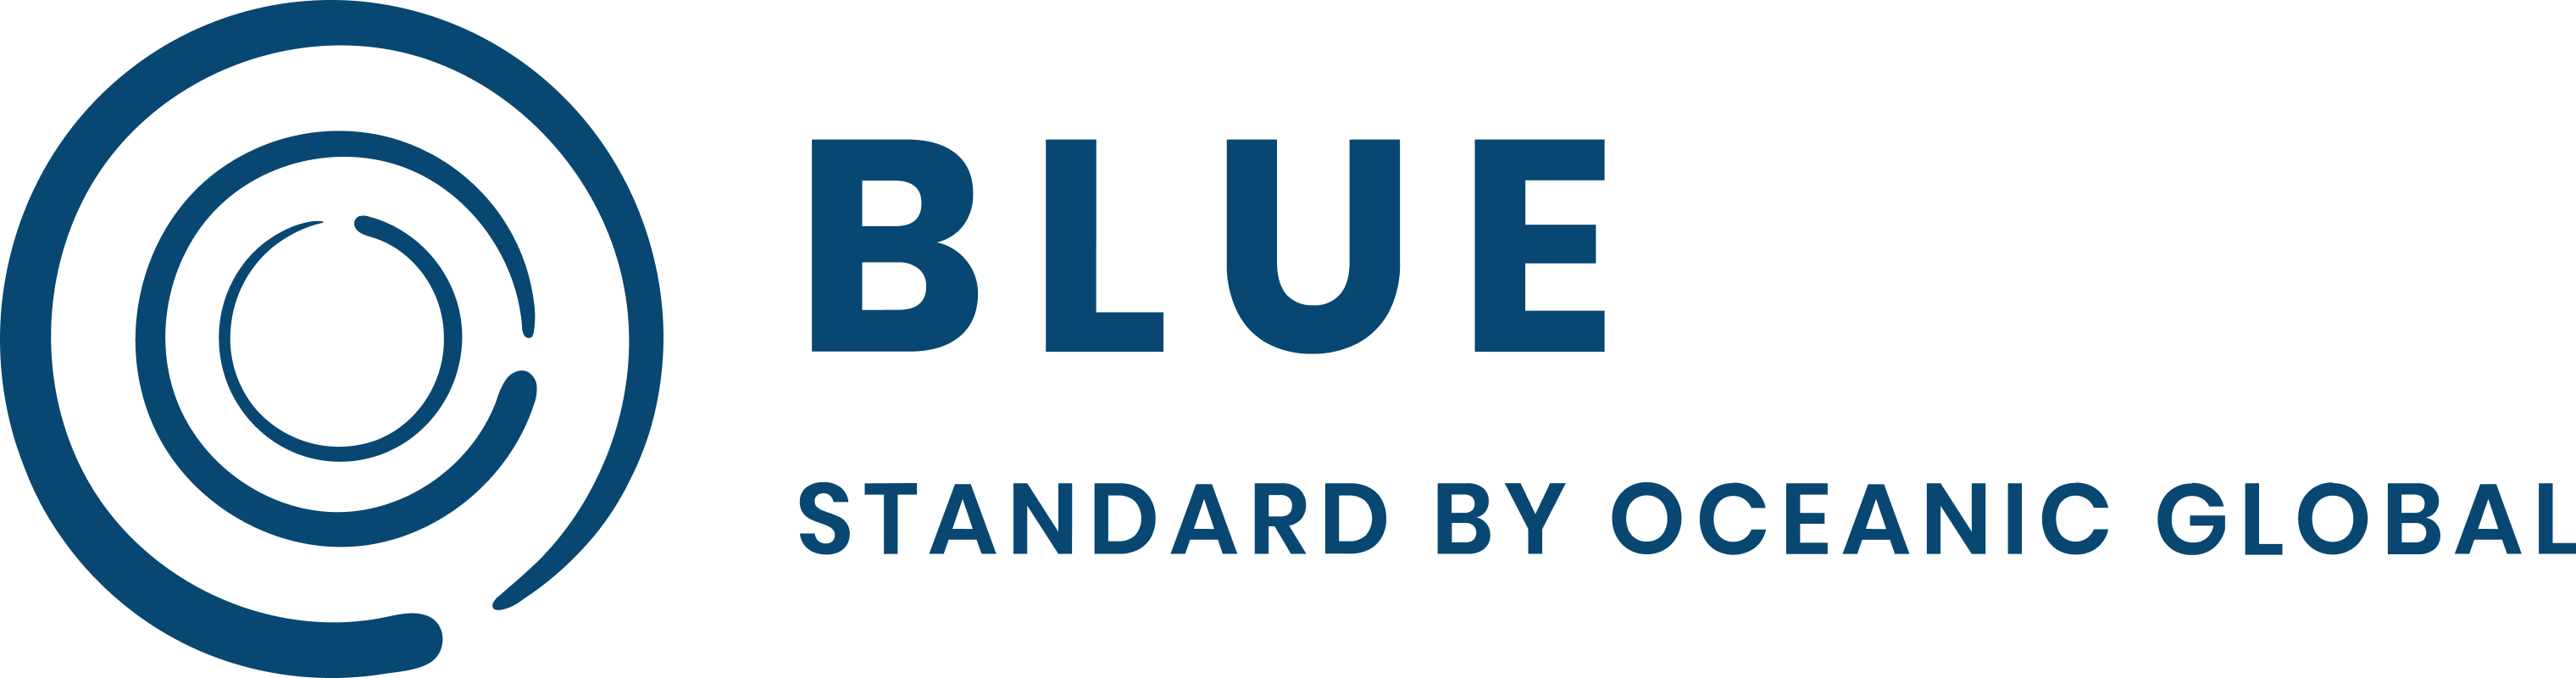 The Blue Standard – Solutions Exist